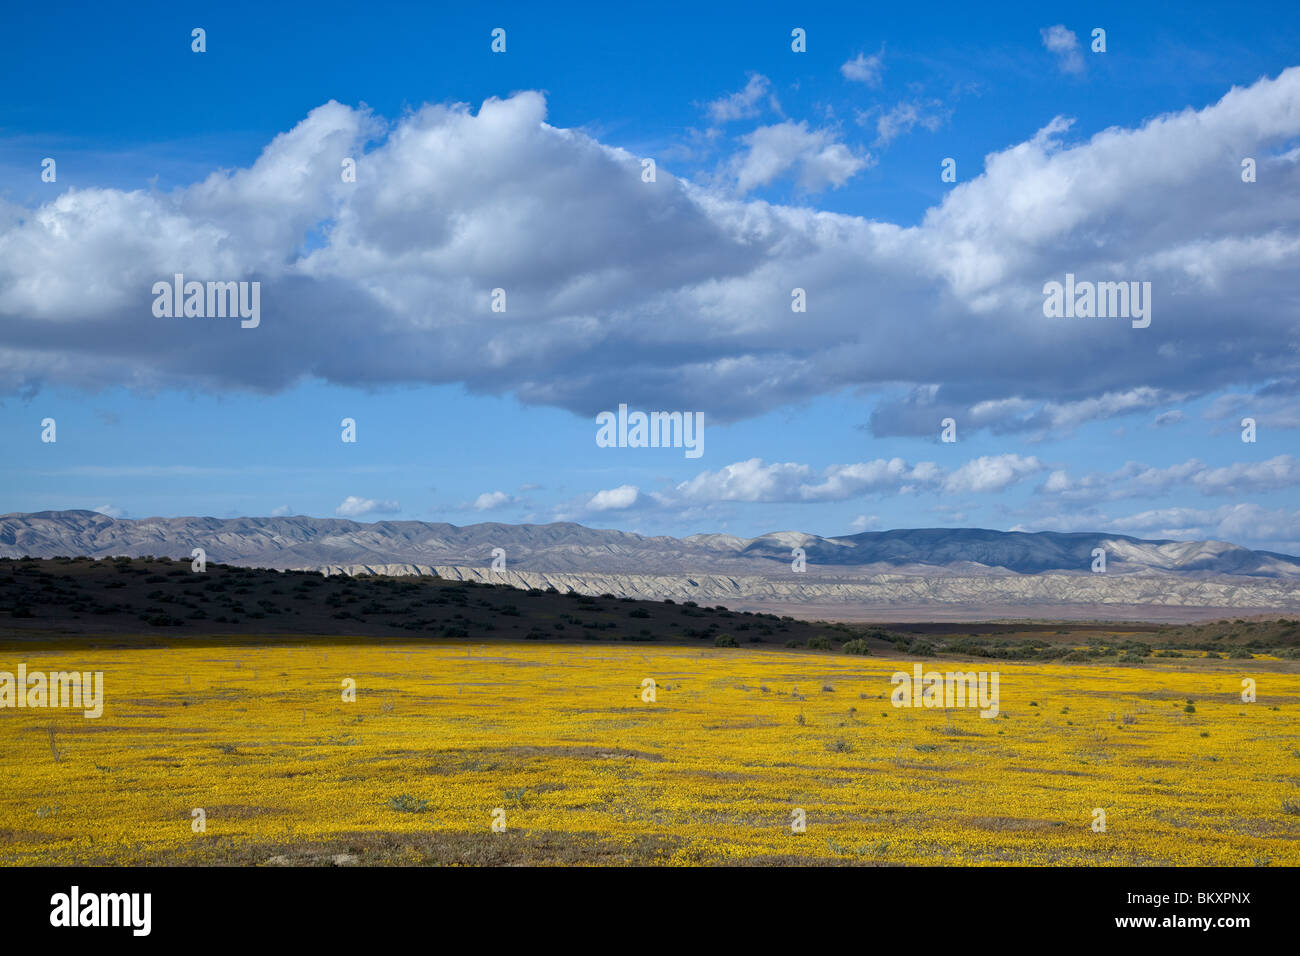 Carrizo Plain National Monument, CA: Evening clouds over the distant hills of the Temblor range with goldfields (Lasthenia spp.) Stock Photo